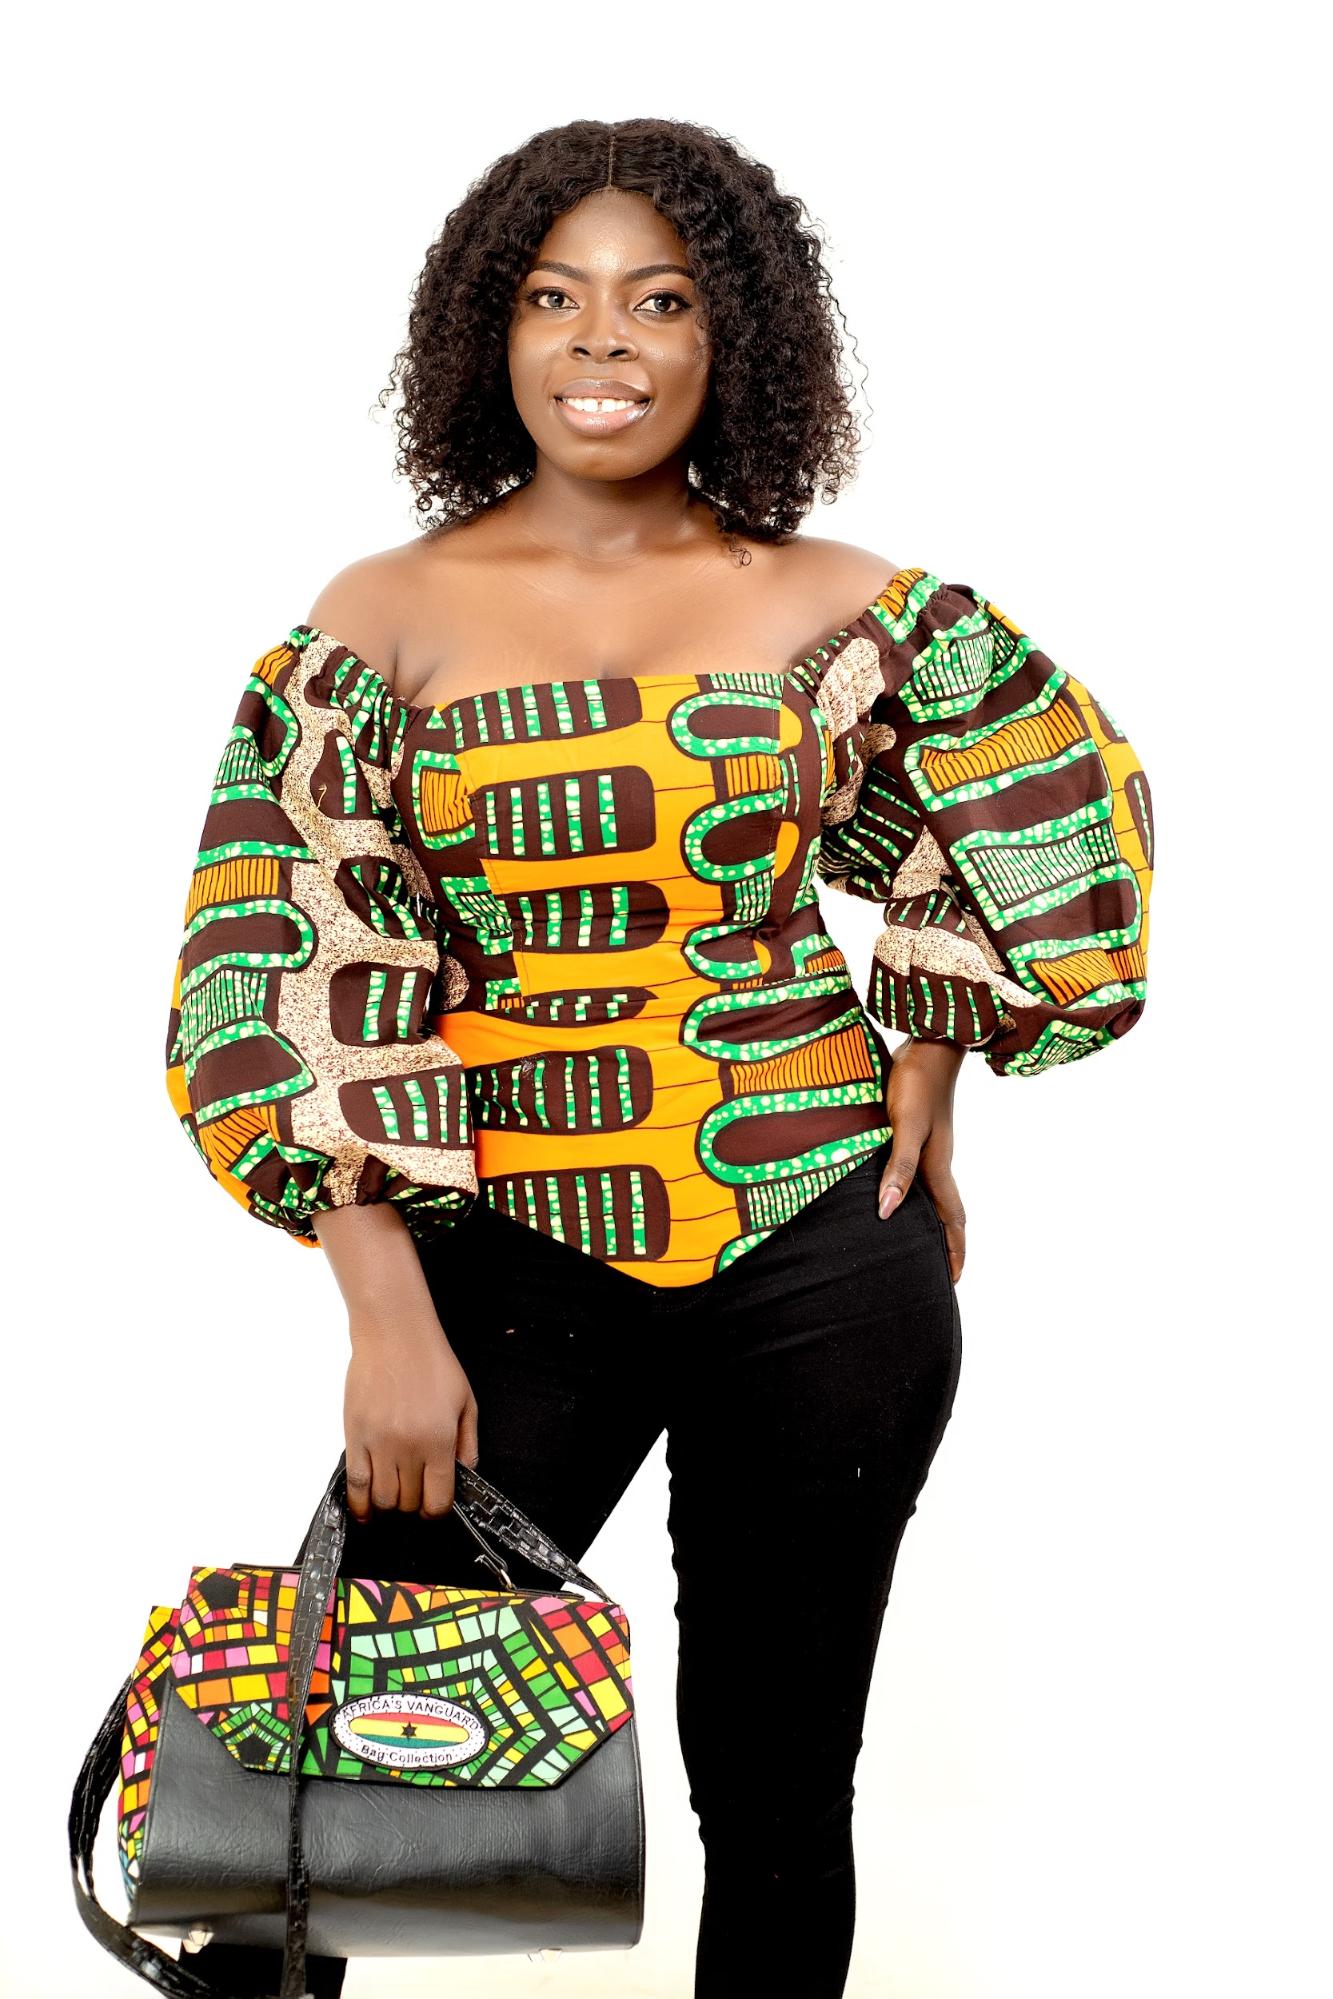 Patricia Quaye in a colorful top from SHE 4 Change featuring traditional African prints and matching handbag